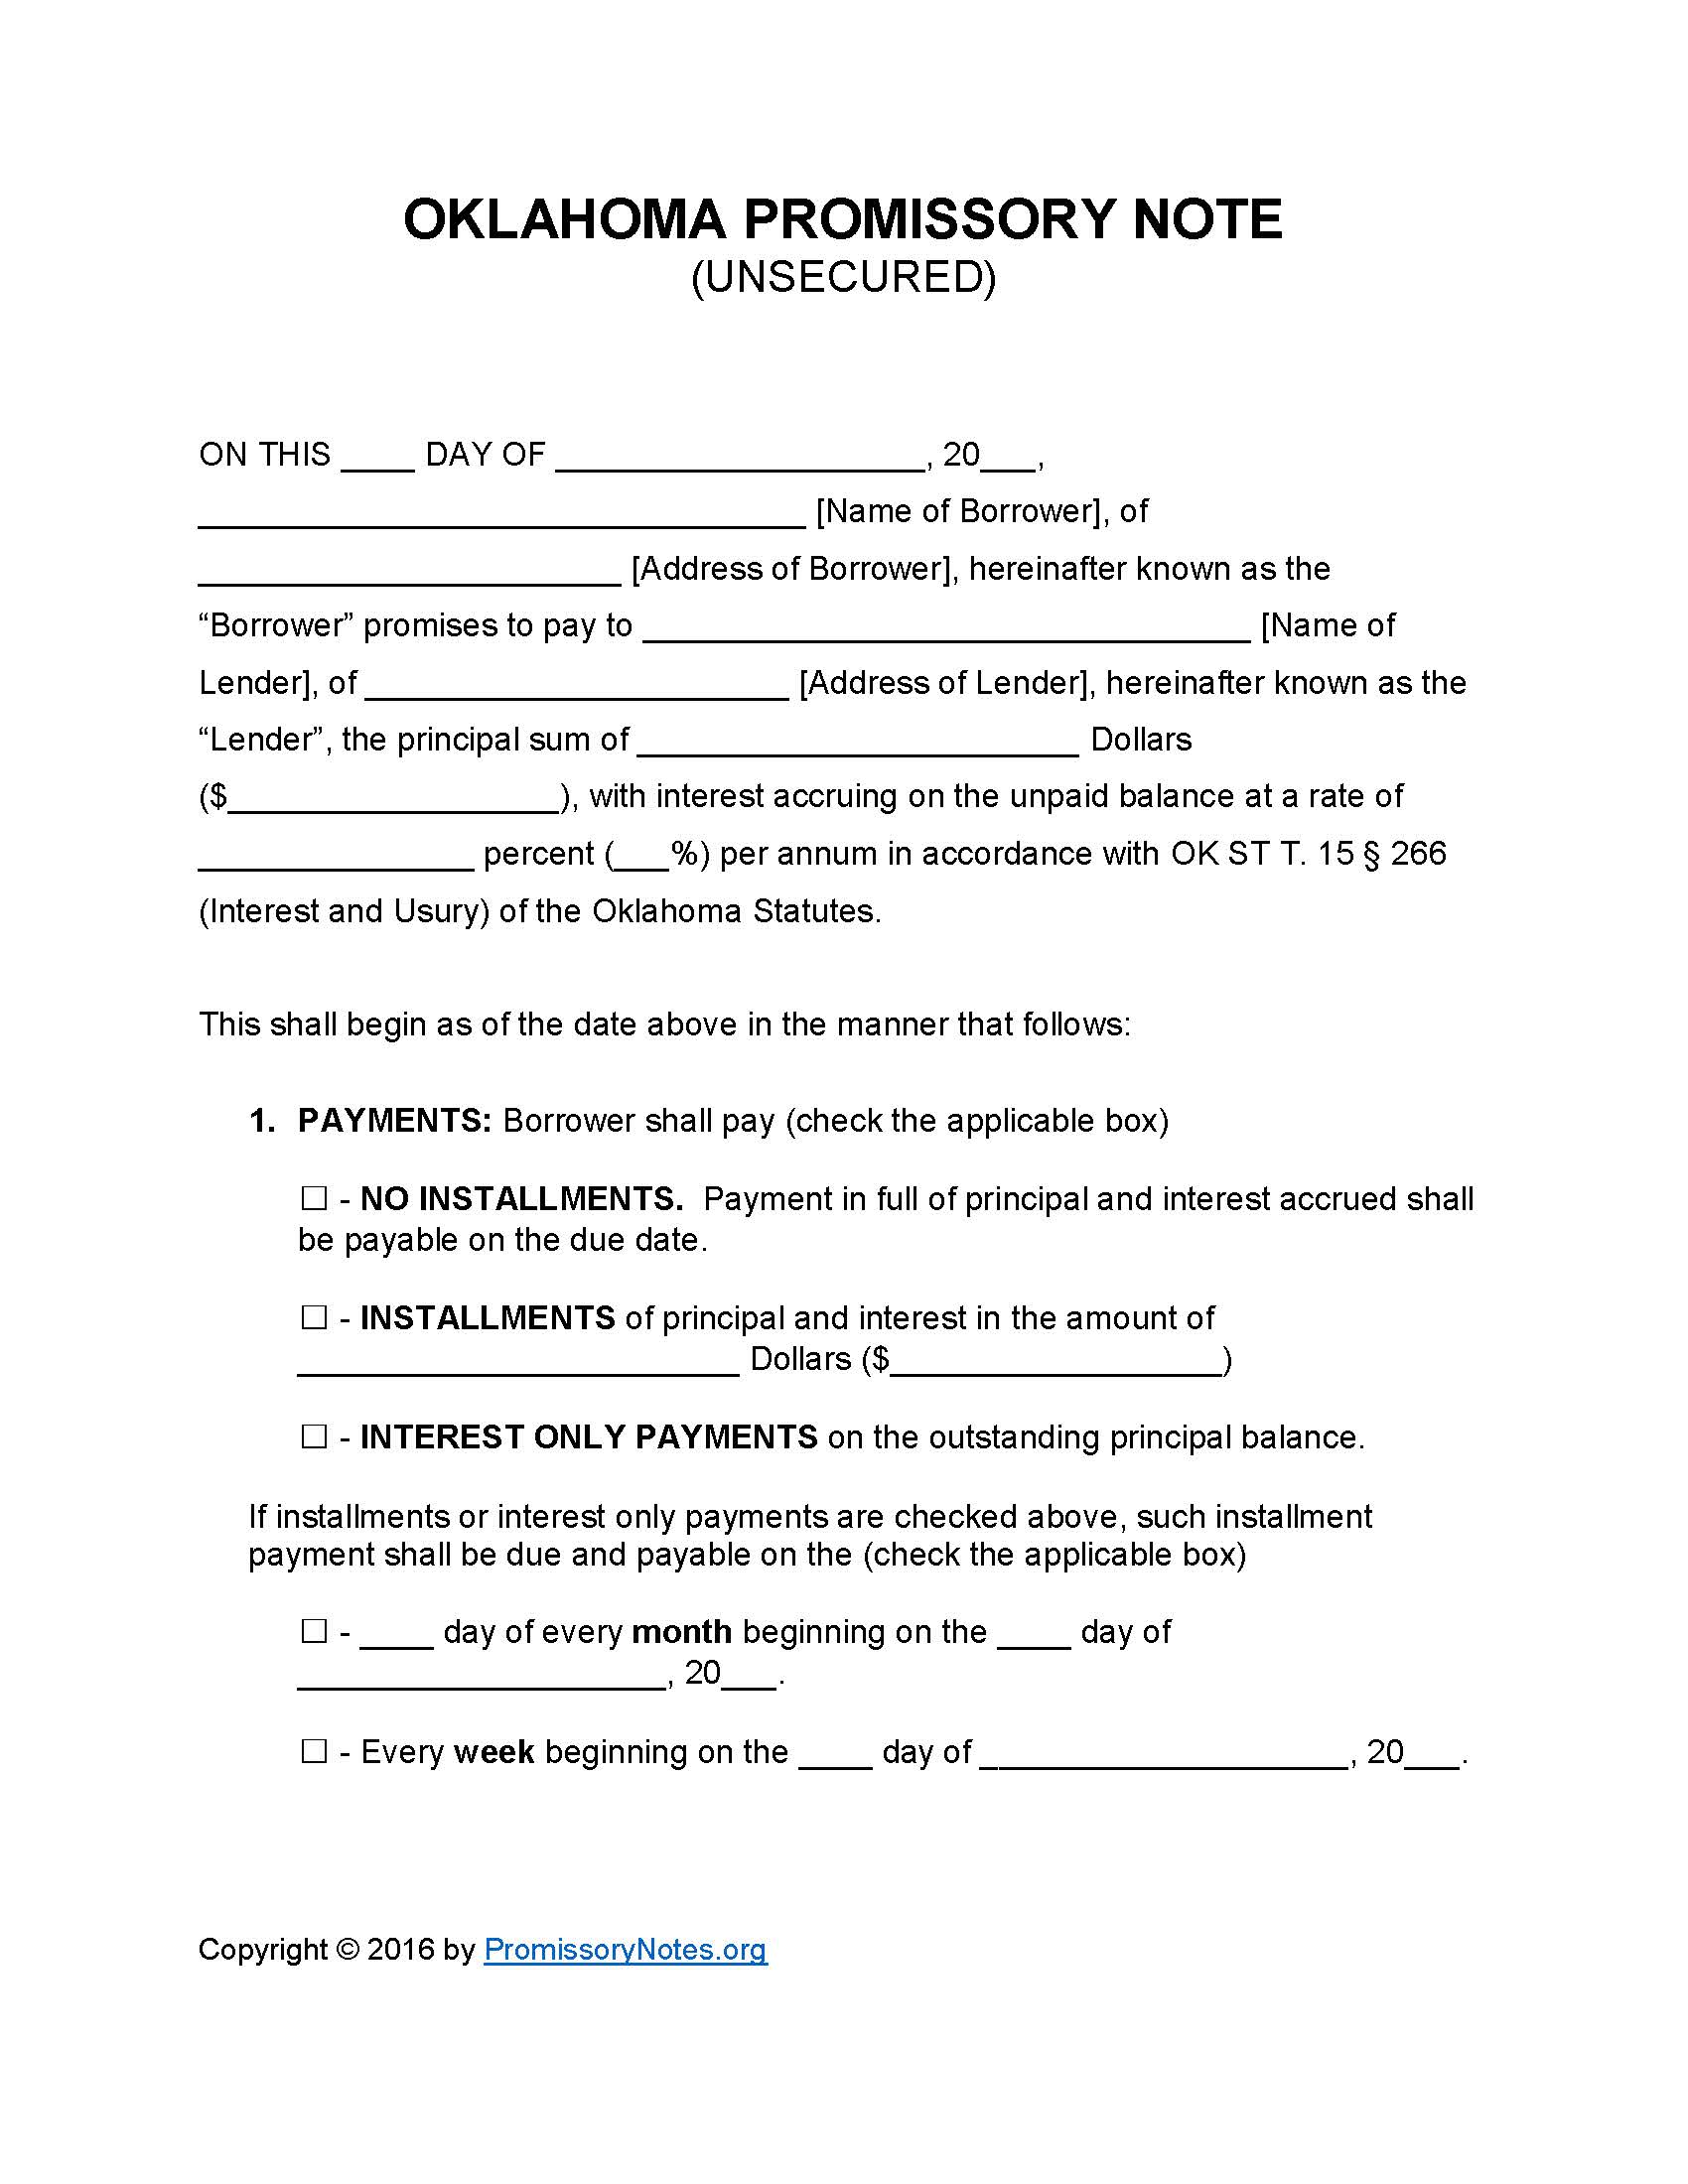 oklahoma-unsecured-promissory-note-form